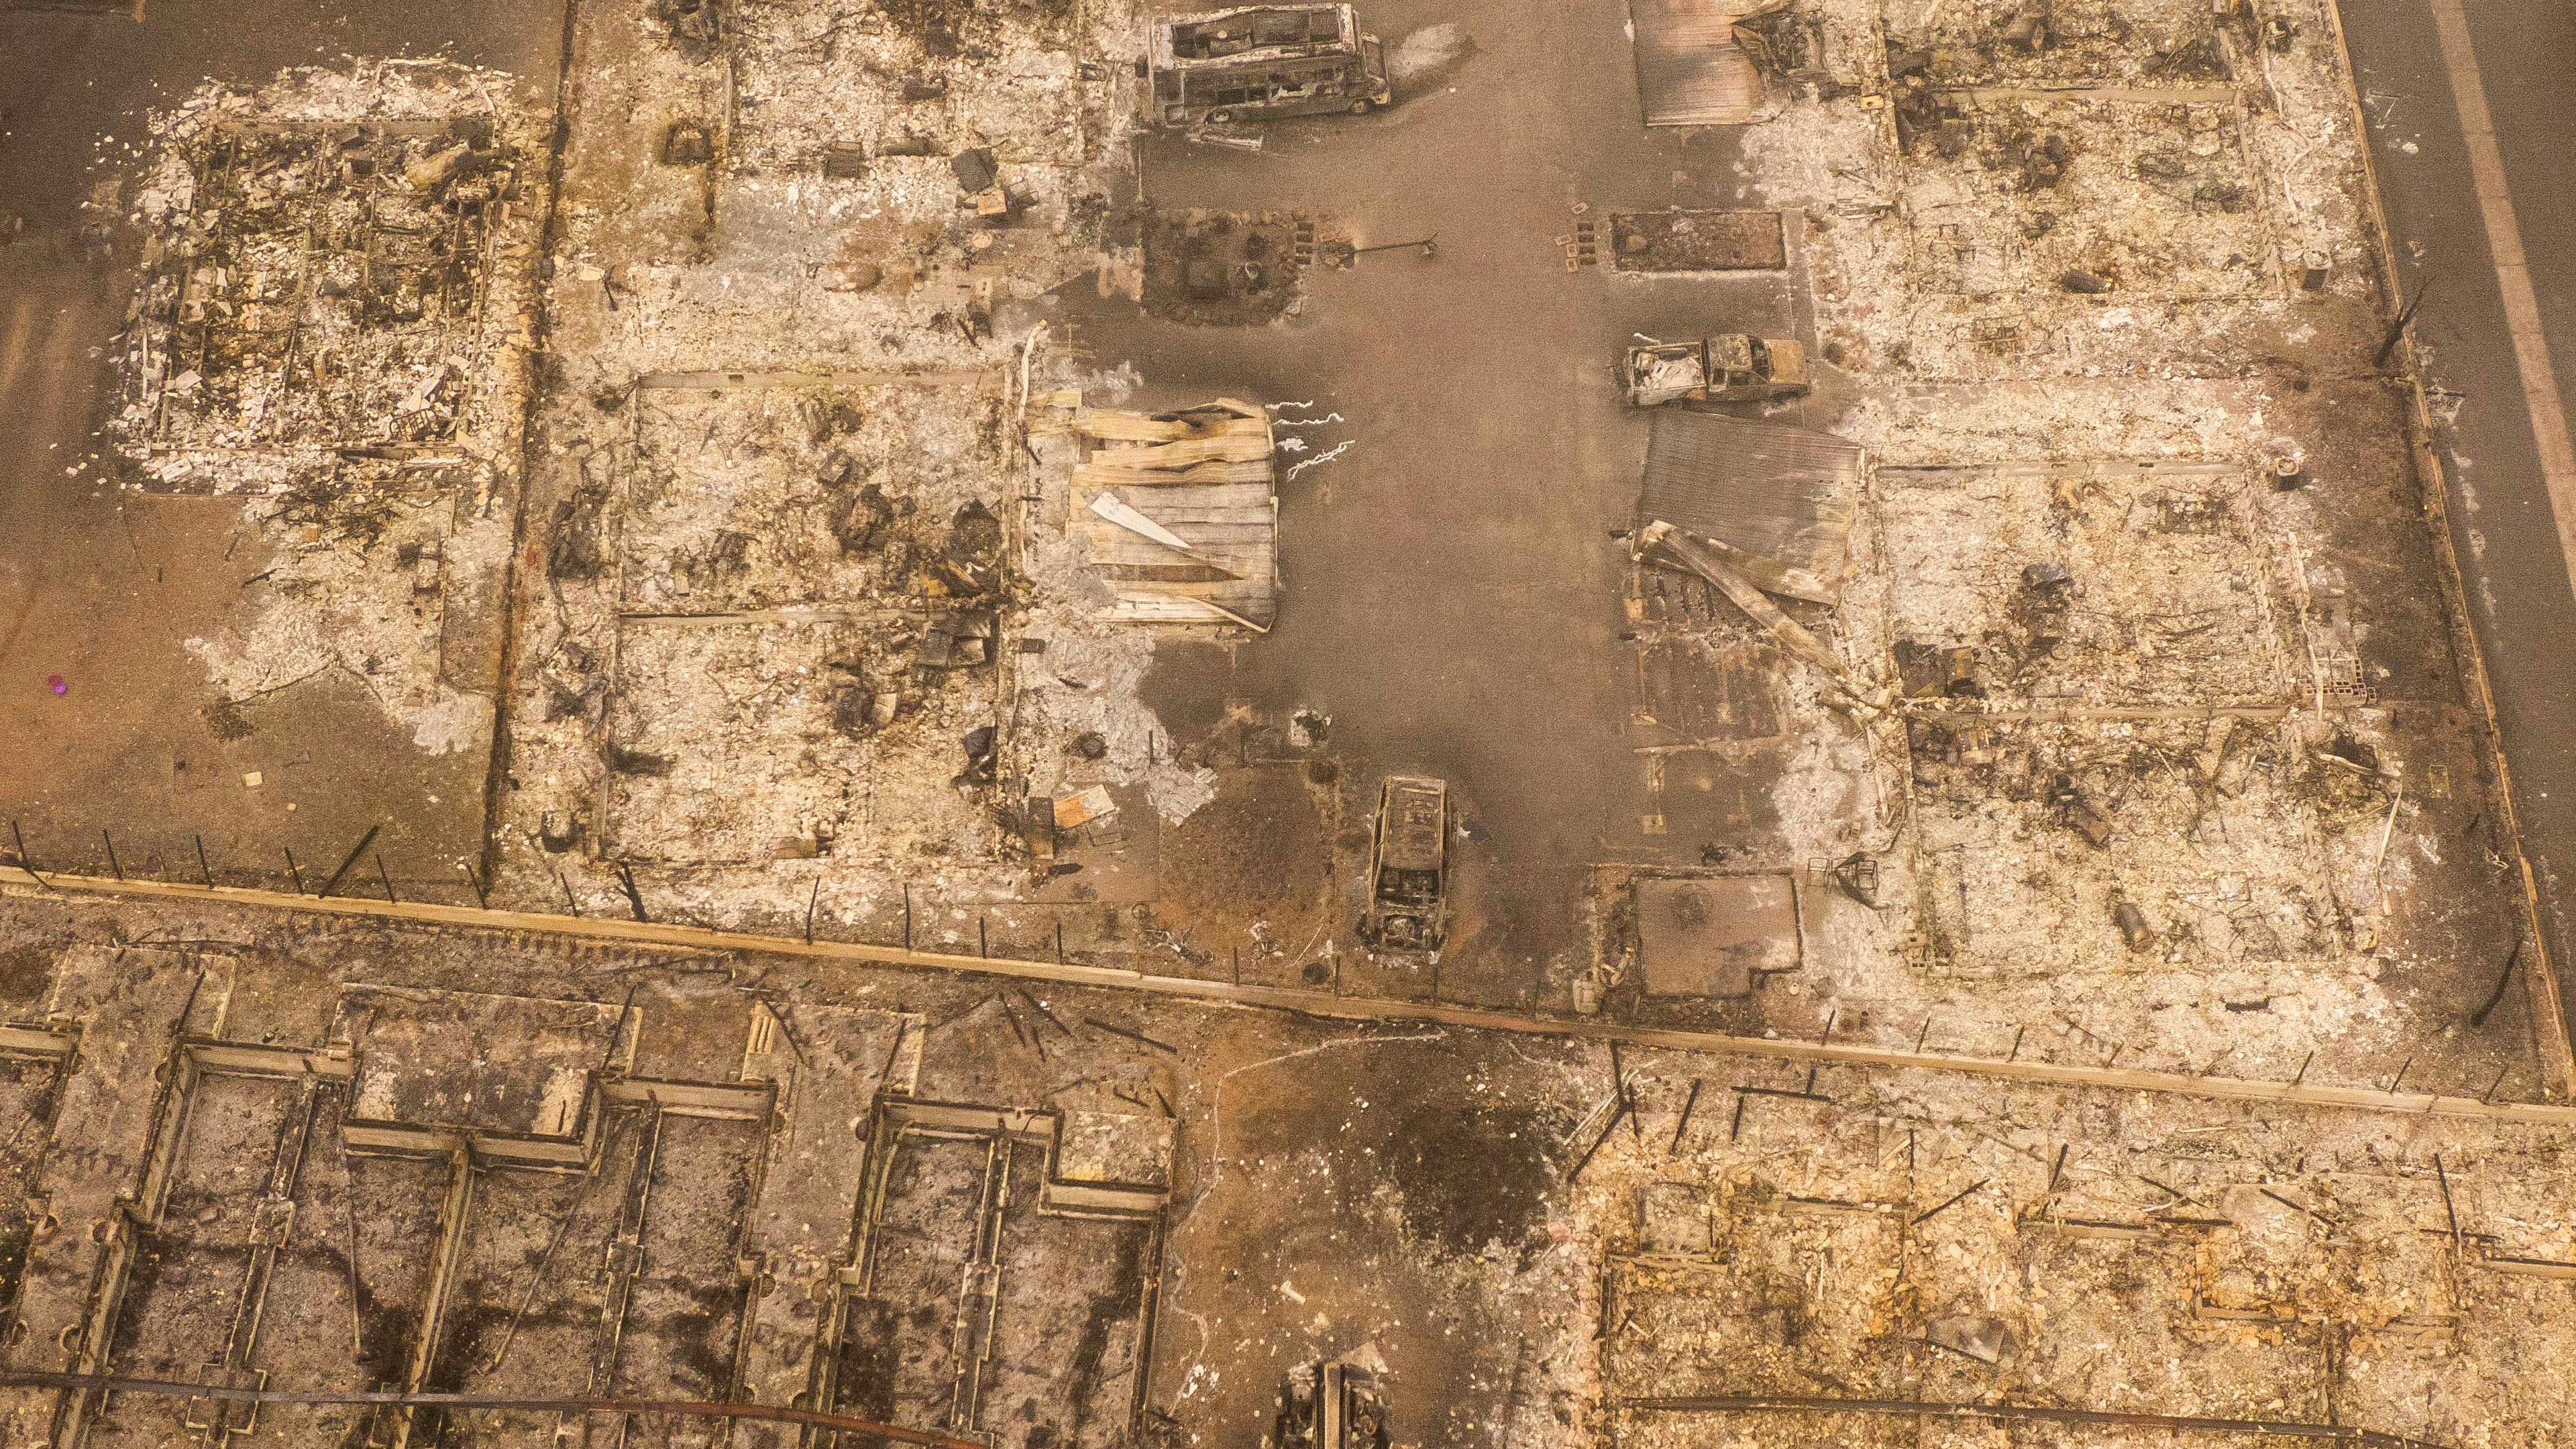 Structures destroyed by wildfire are seen in aerial drone photo on September 12, 2020 in Talent, Oregon